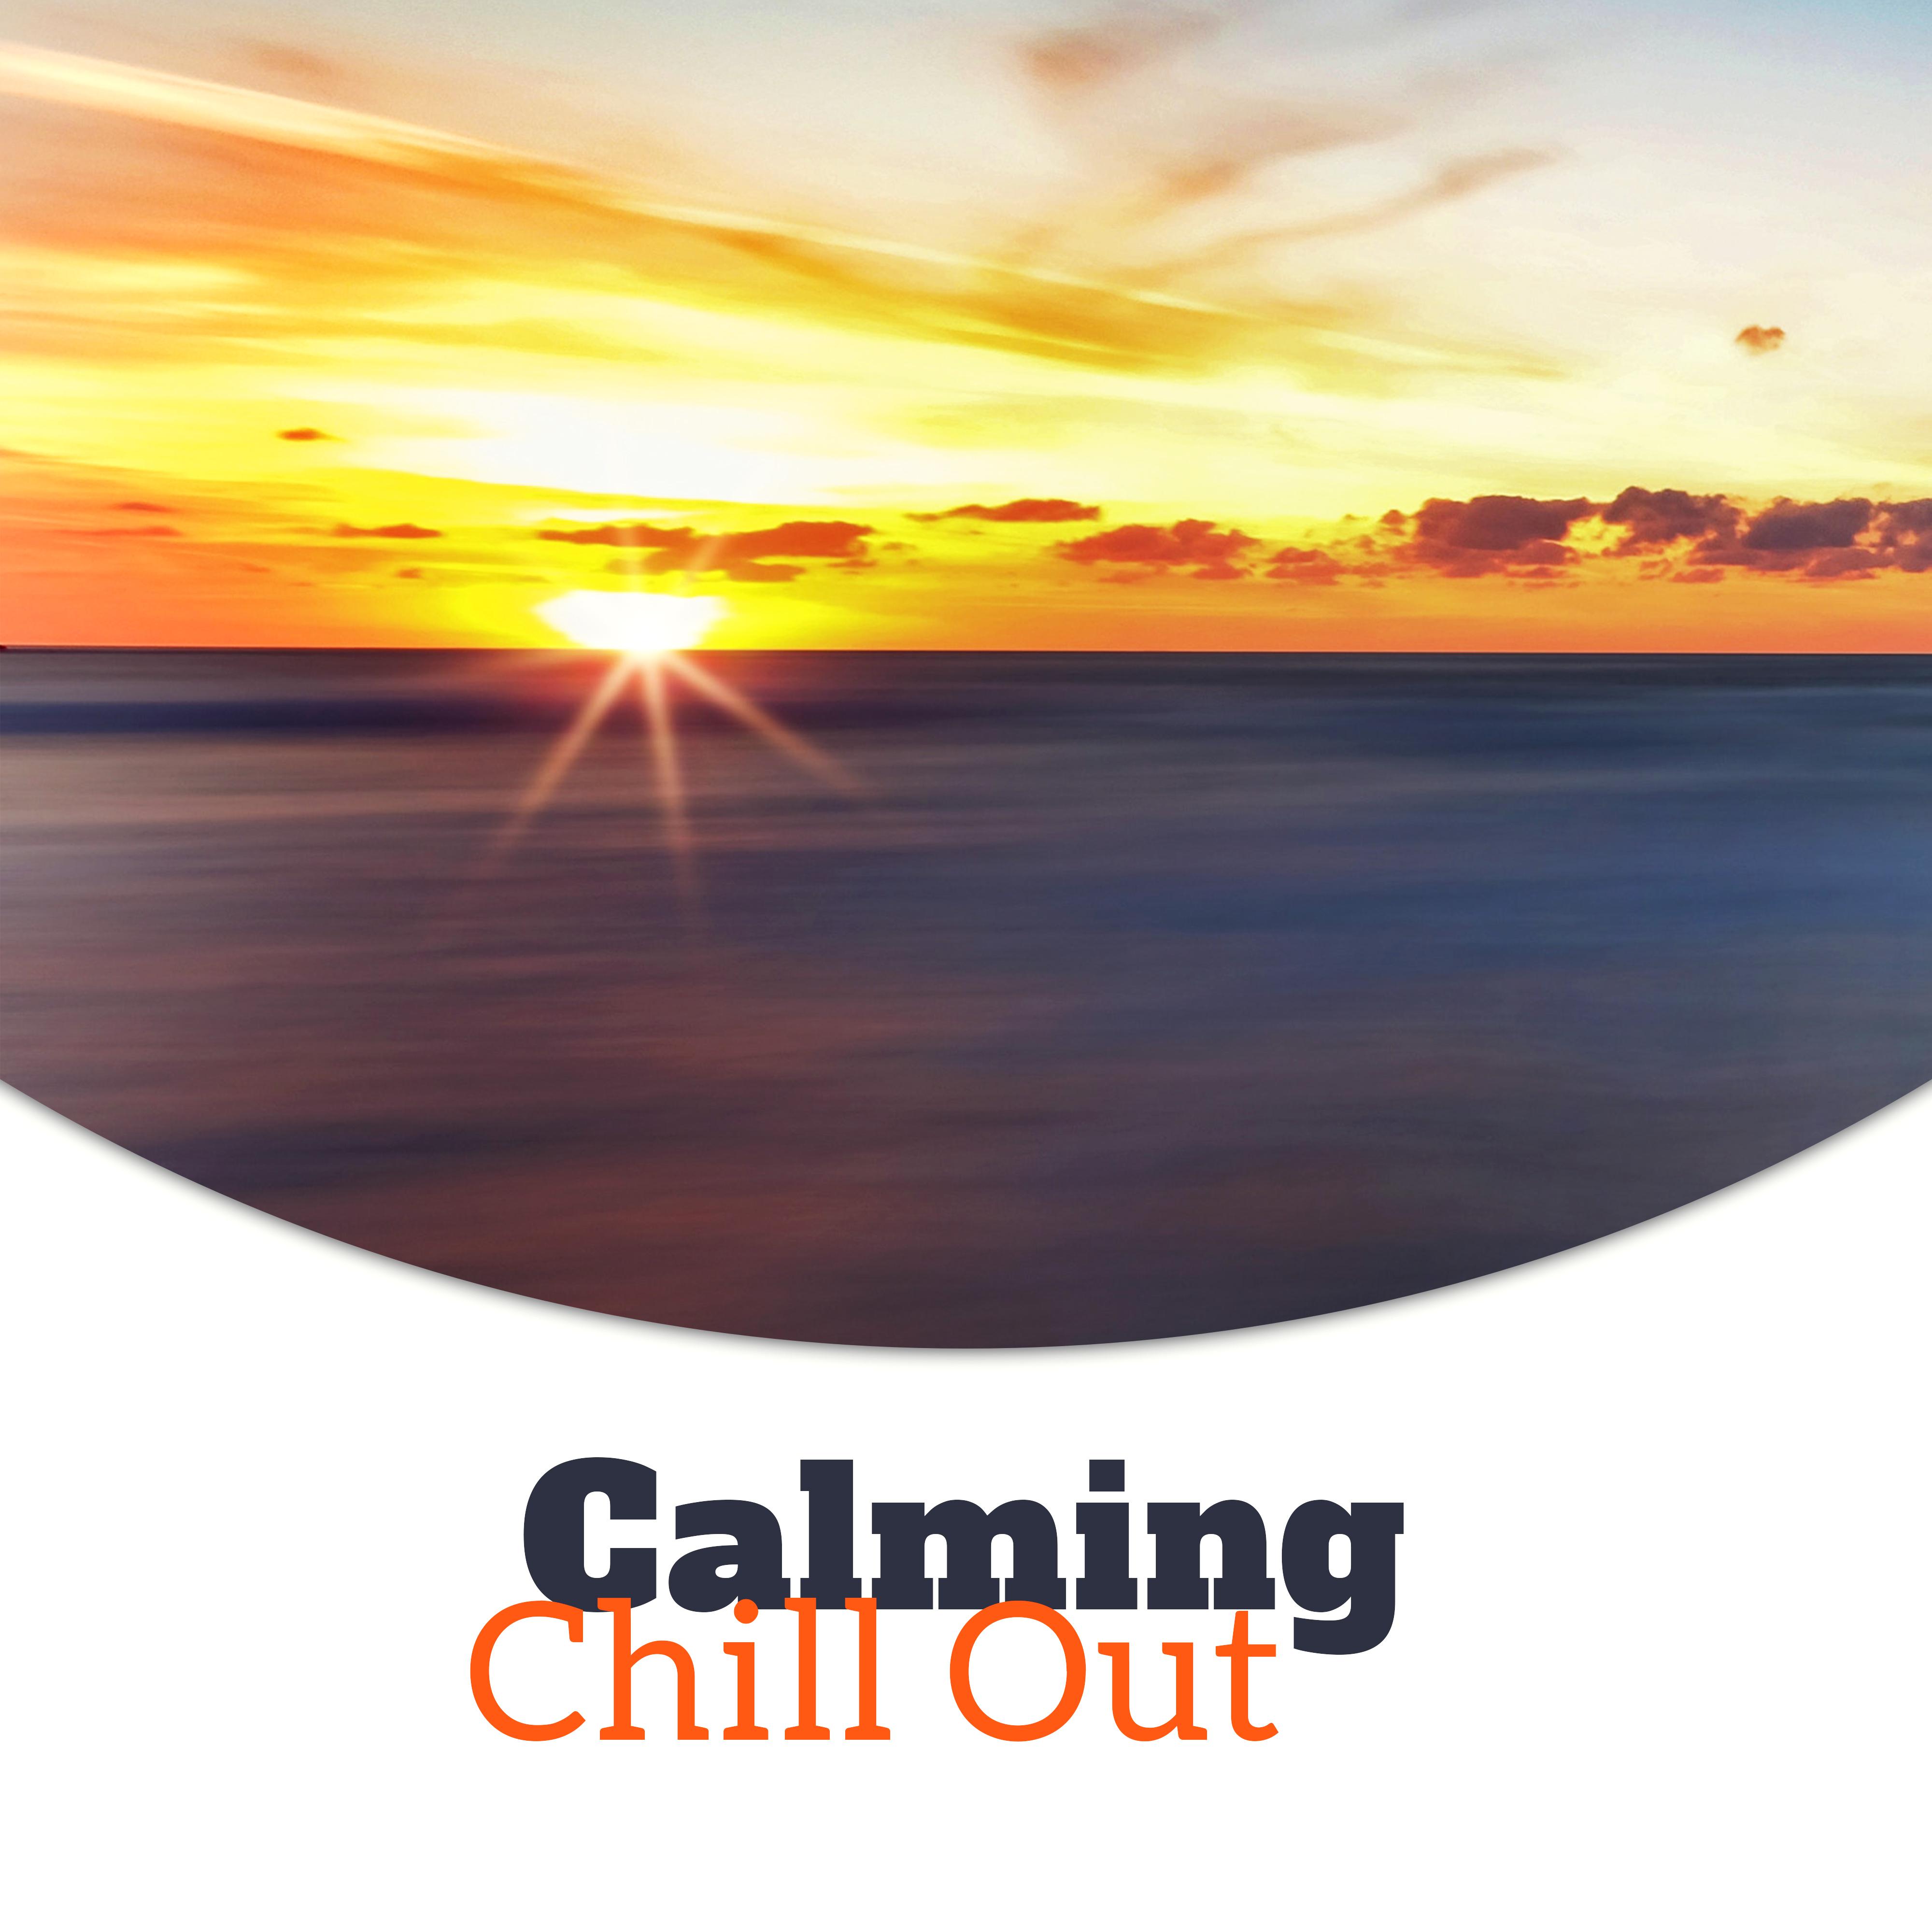 Calming Chill Out